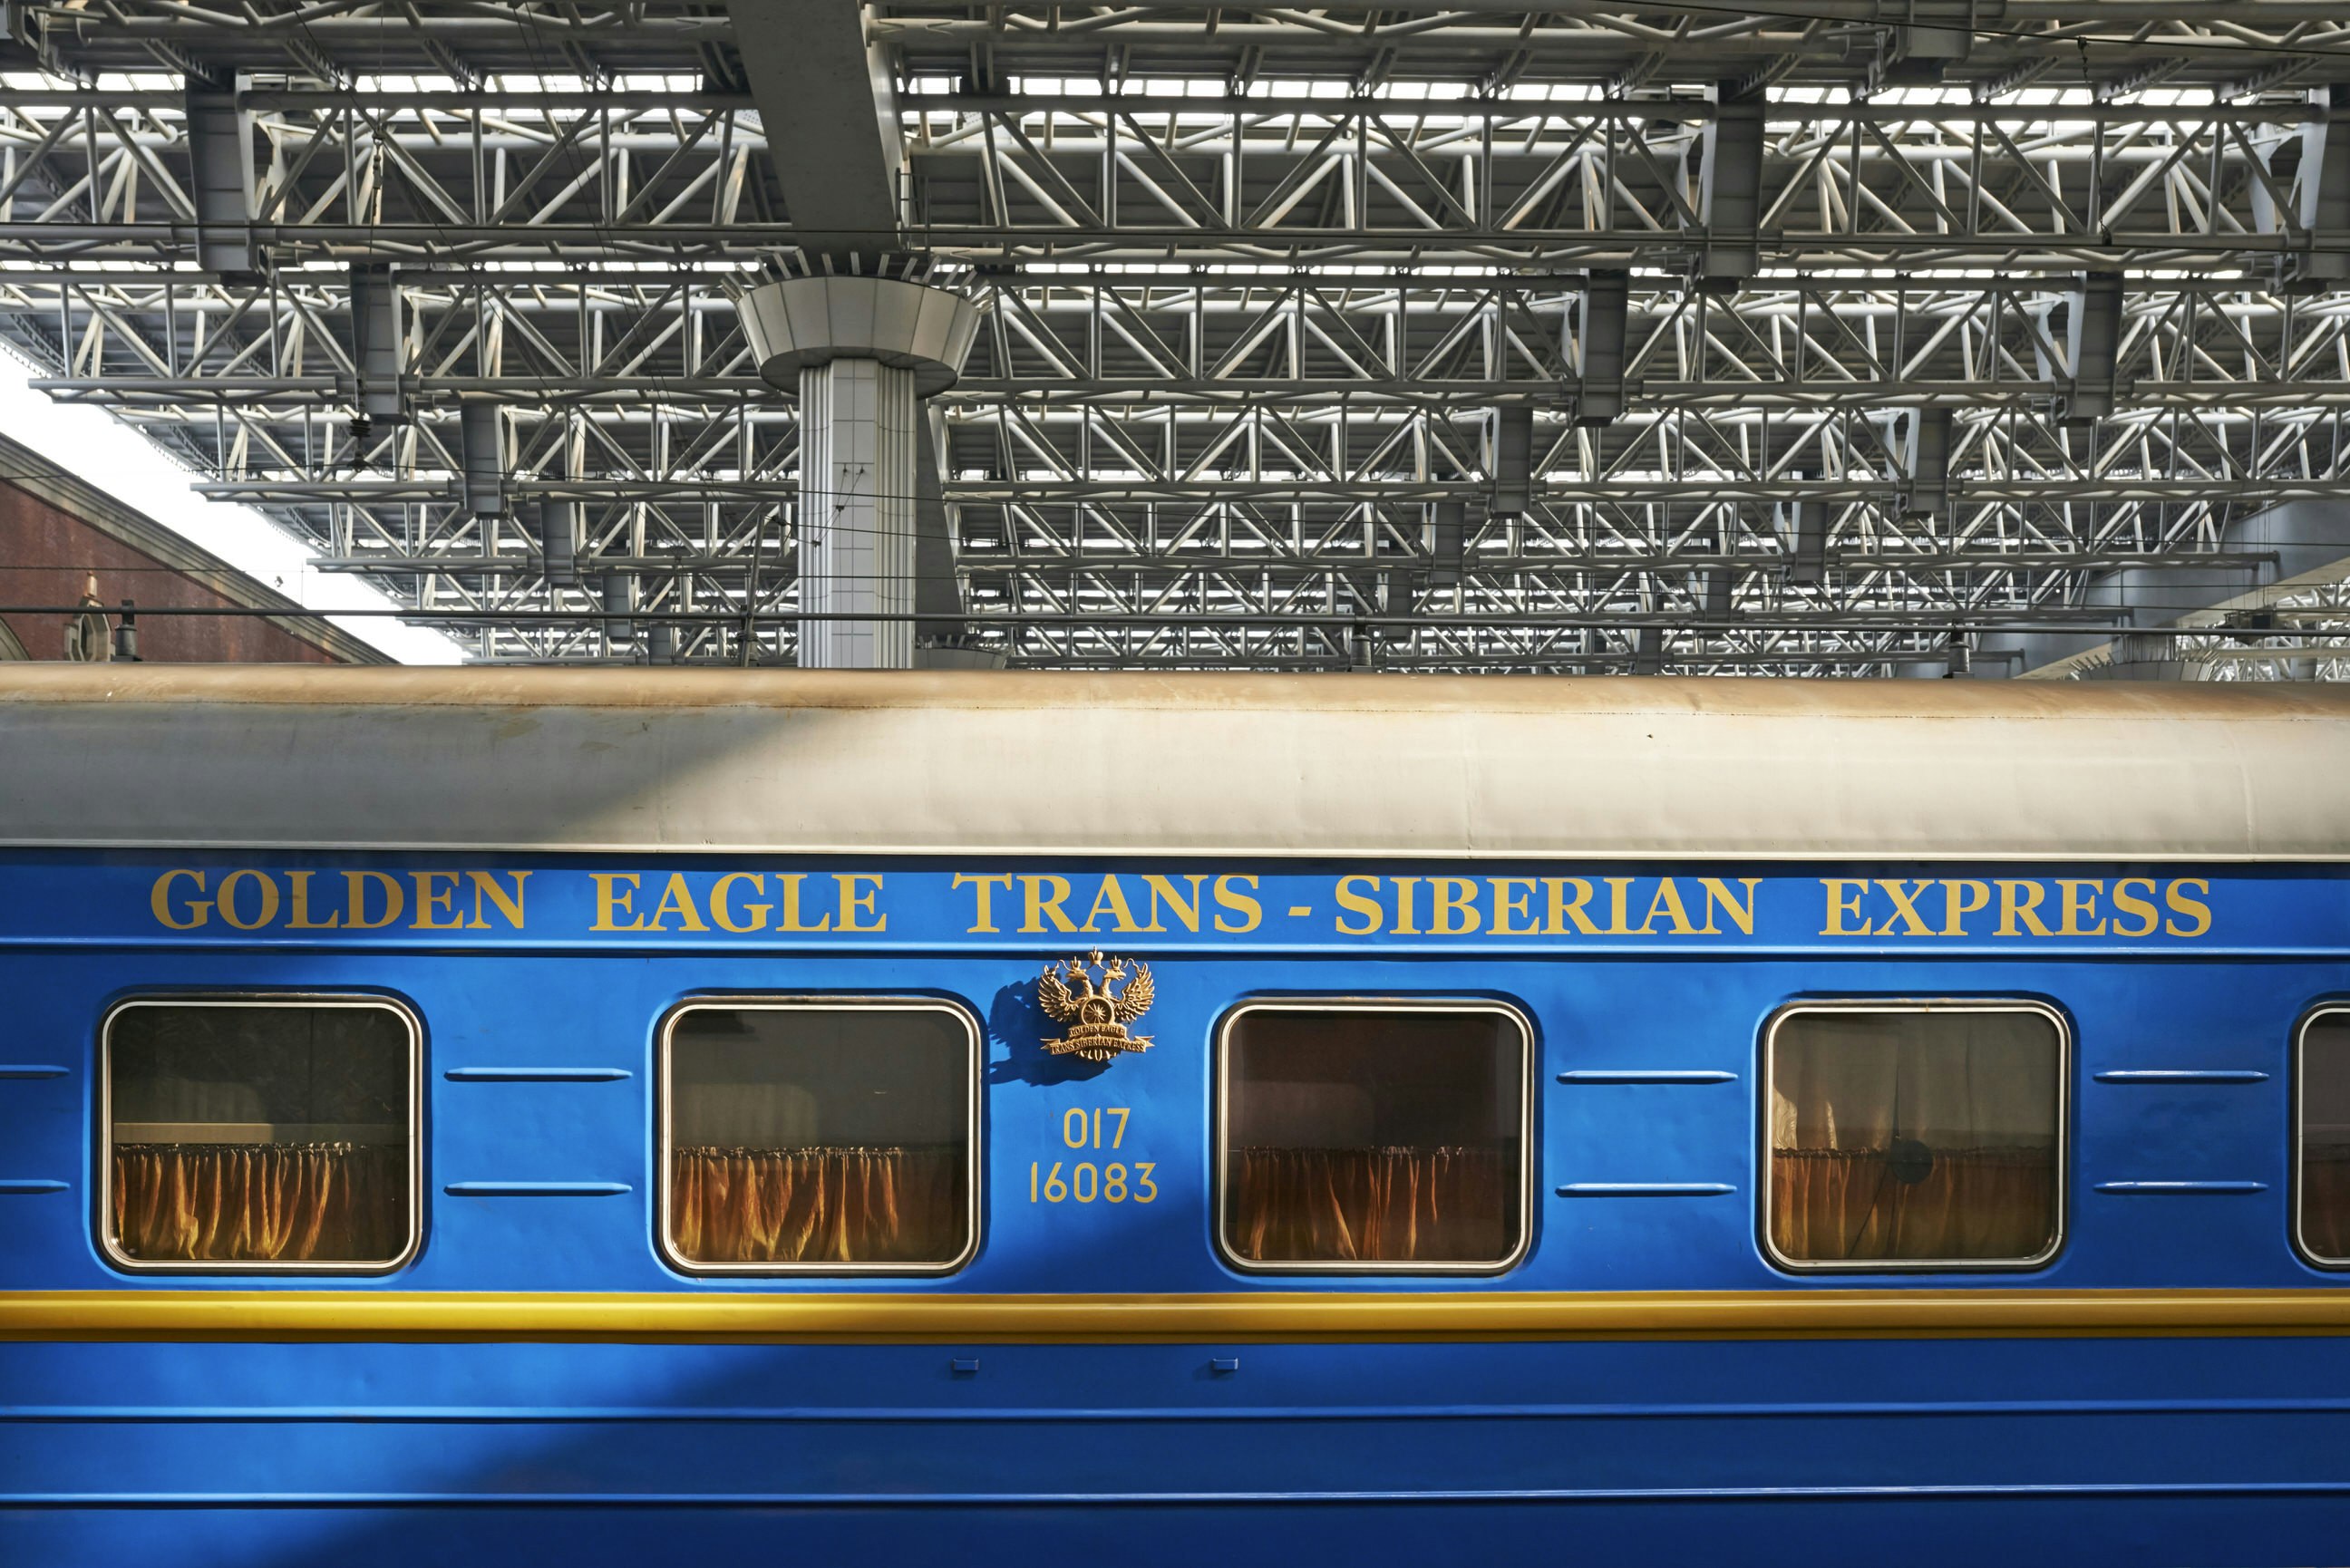 A bright blue vintage train carriage sitting in a covered train station; gold-coloured on the train states 'Golden Eagle Trans-Siberian Express'.